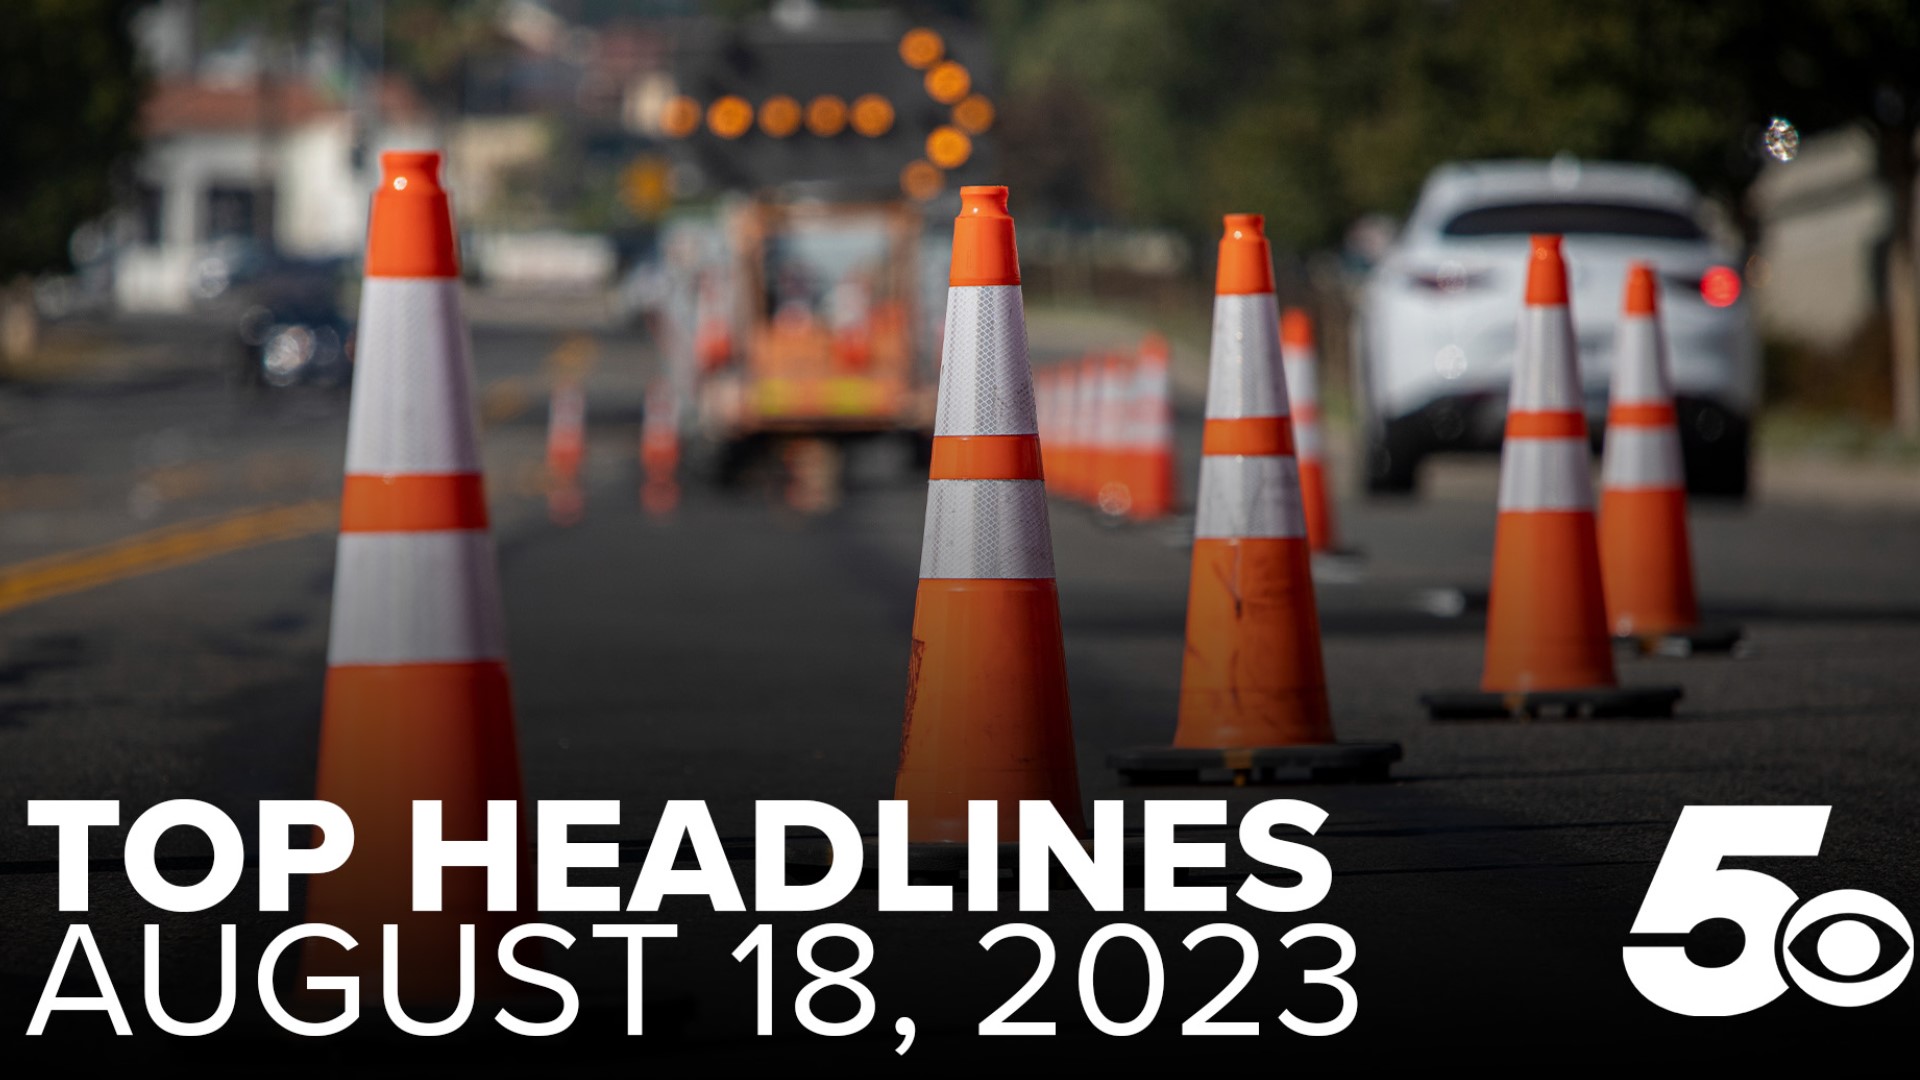 Today's Top Headlines include construction delays, students bringing guns to school, and what the state is doing about the increasing overdose deaths.